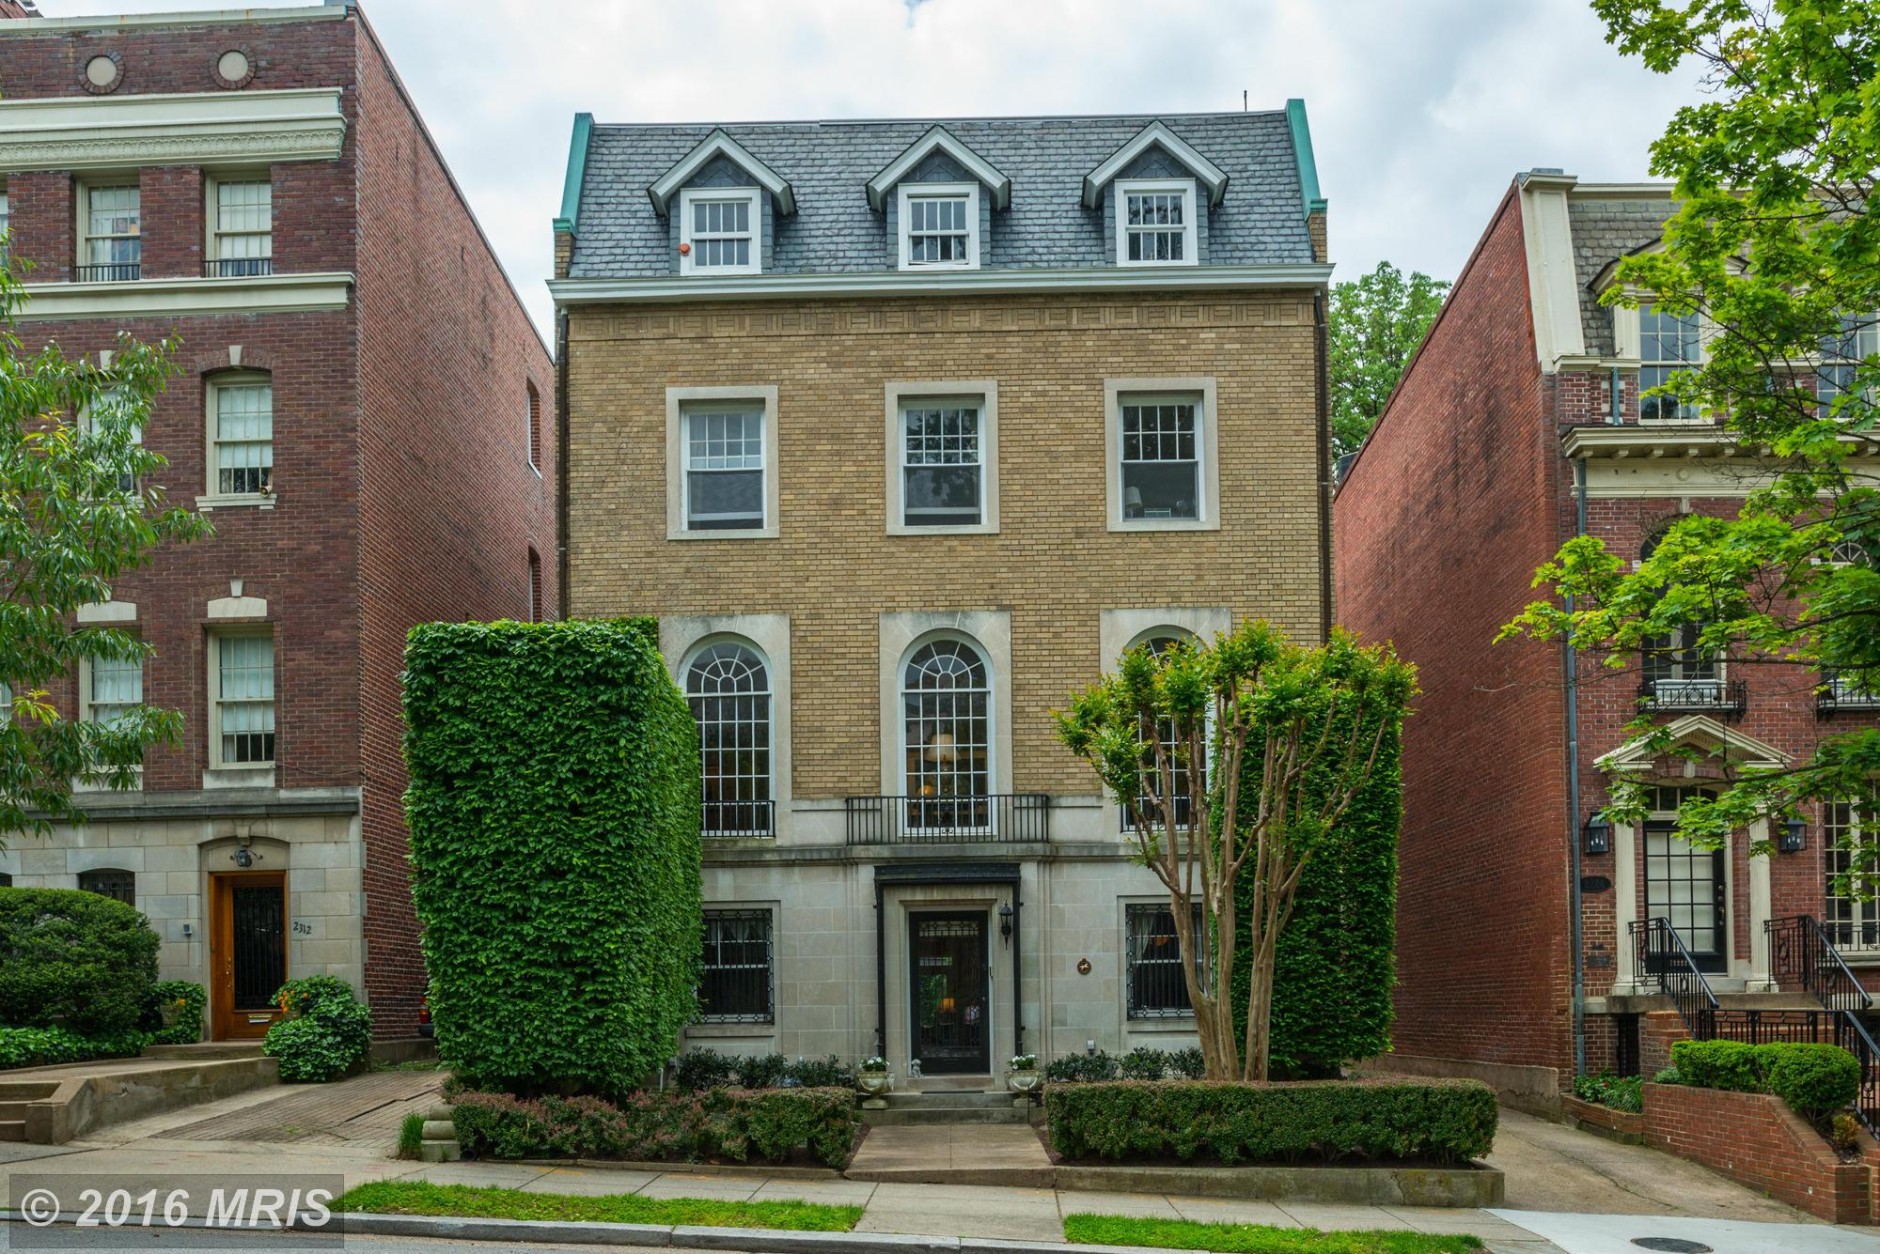 12. $2,850,000
2318 California St. NW, Washington, D.C.
This Beaux Arts house was built in 1923; it has three bedrooms, three full bathrooms and a half-bath. (MRIS)